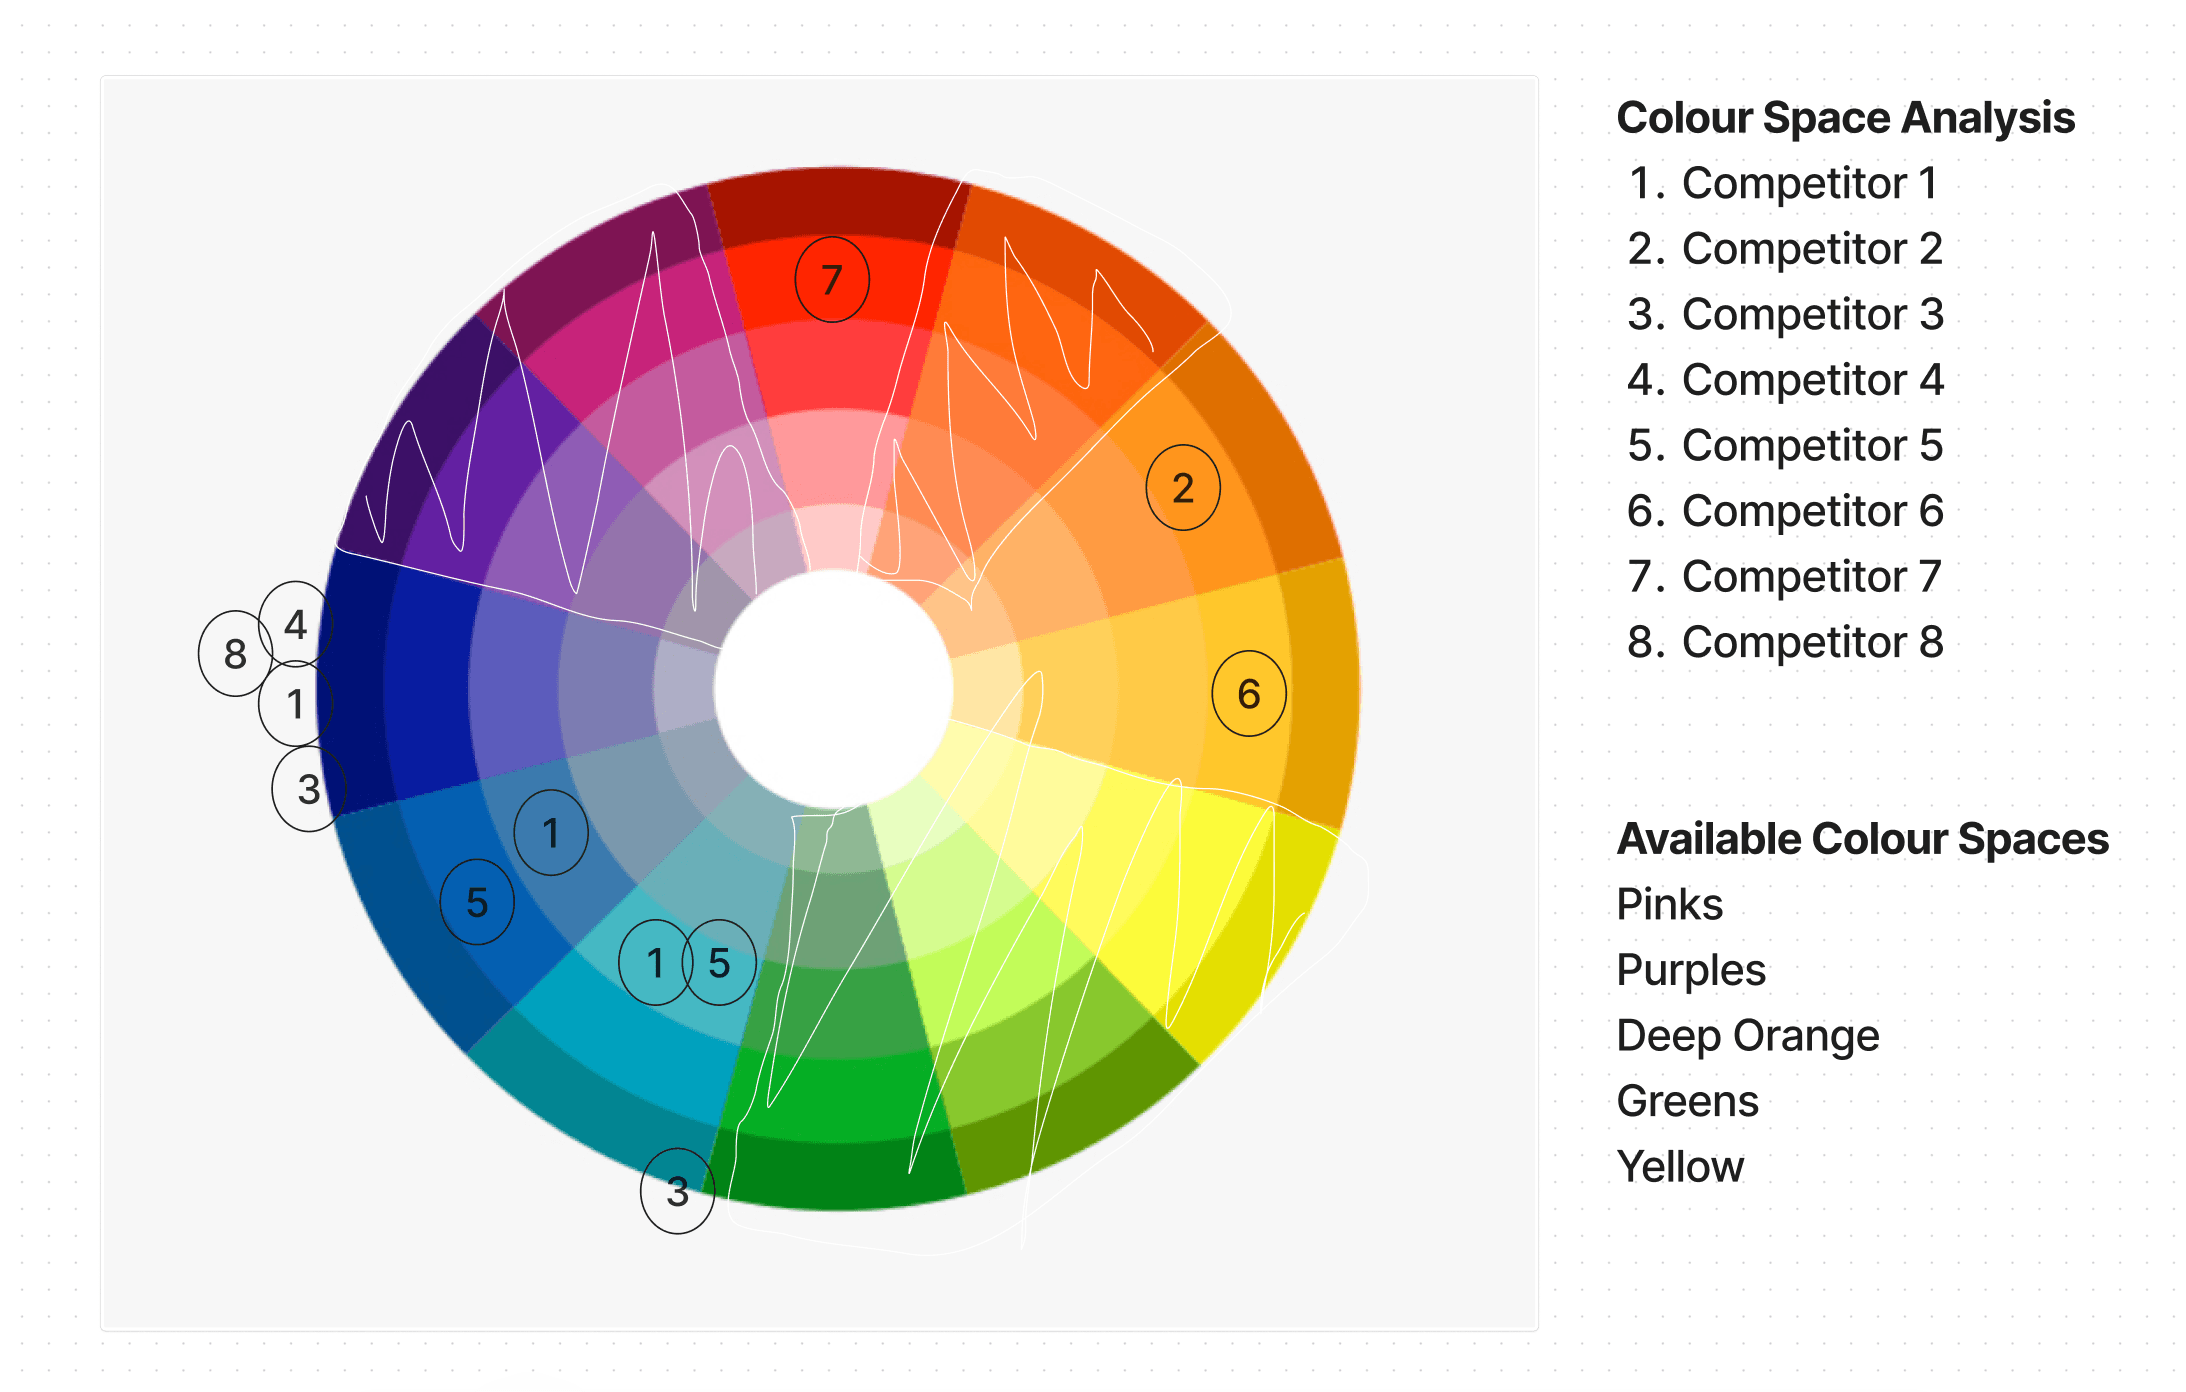 An example colour wheel showing sample colour space analysis data